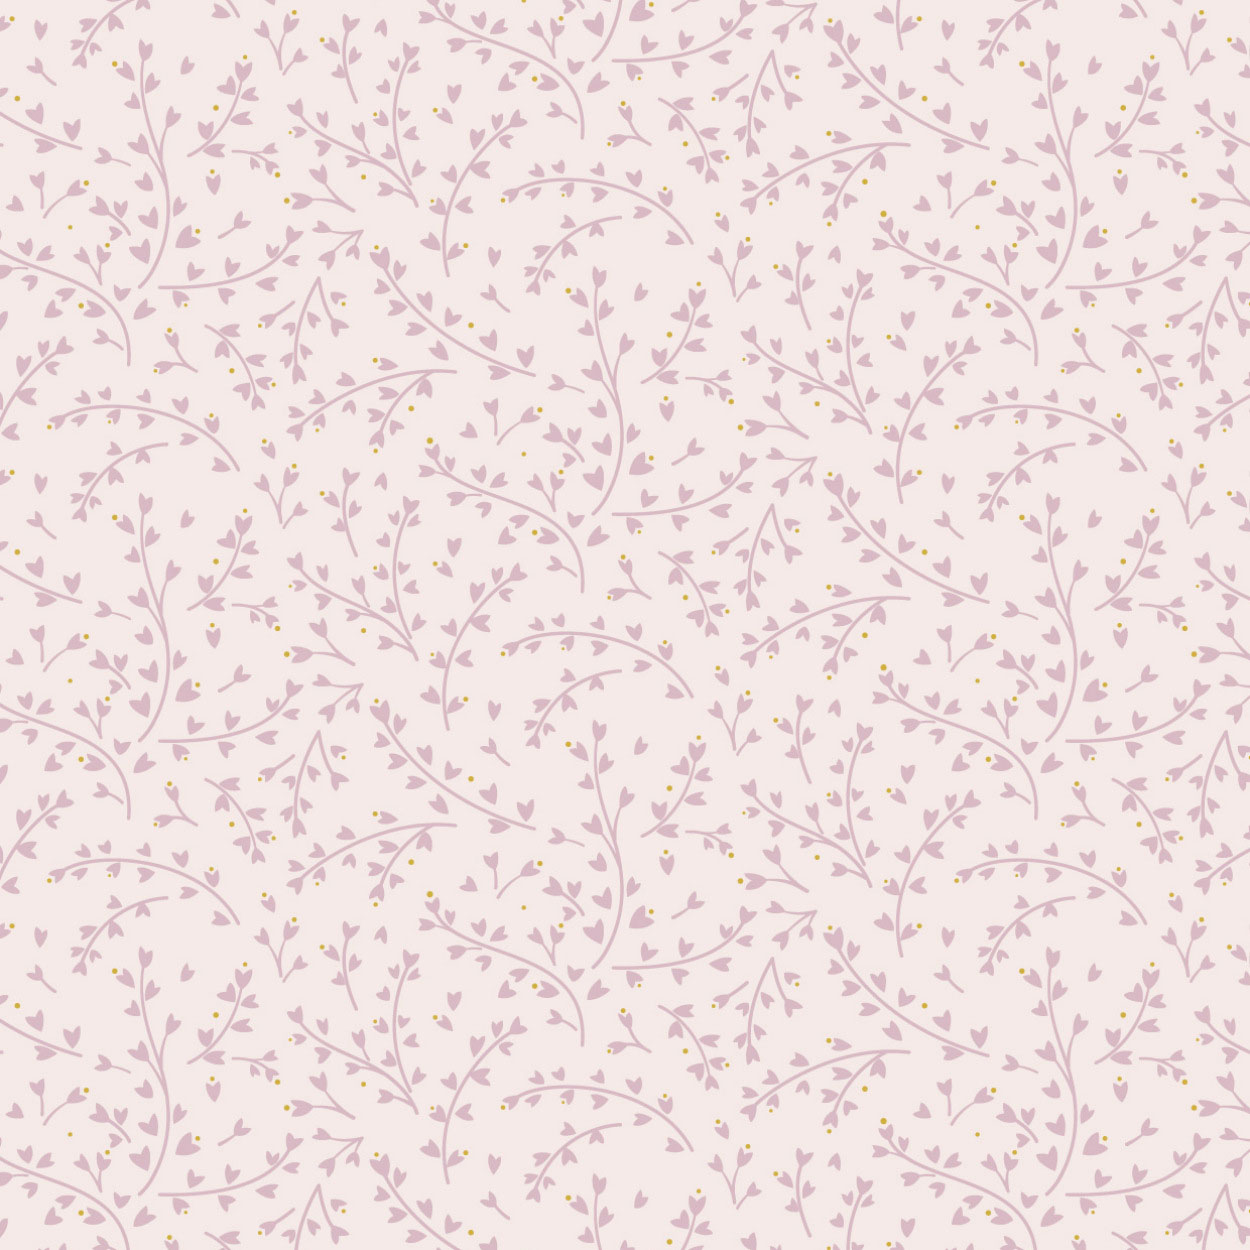 Floral Song By Cassandra Connolly For Lewis & Irene - Natures Gifts Light Pink